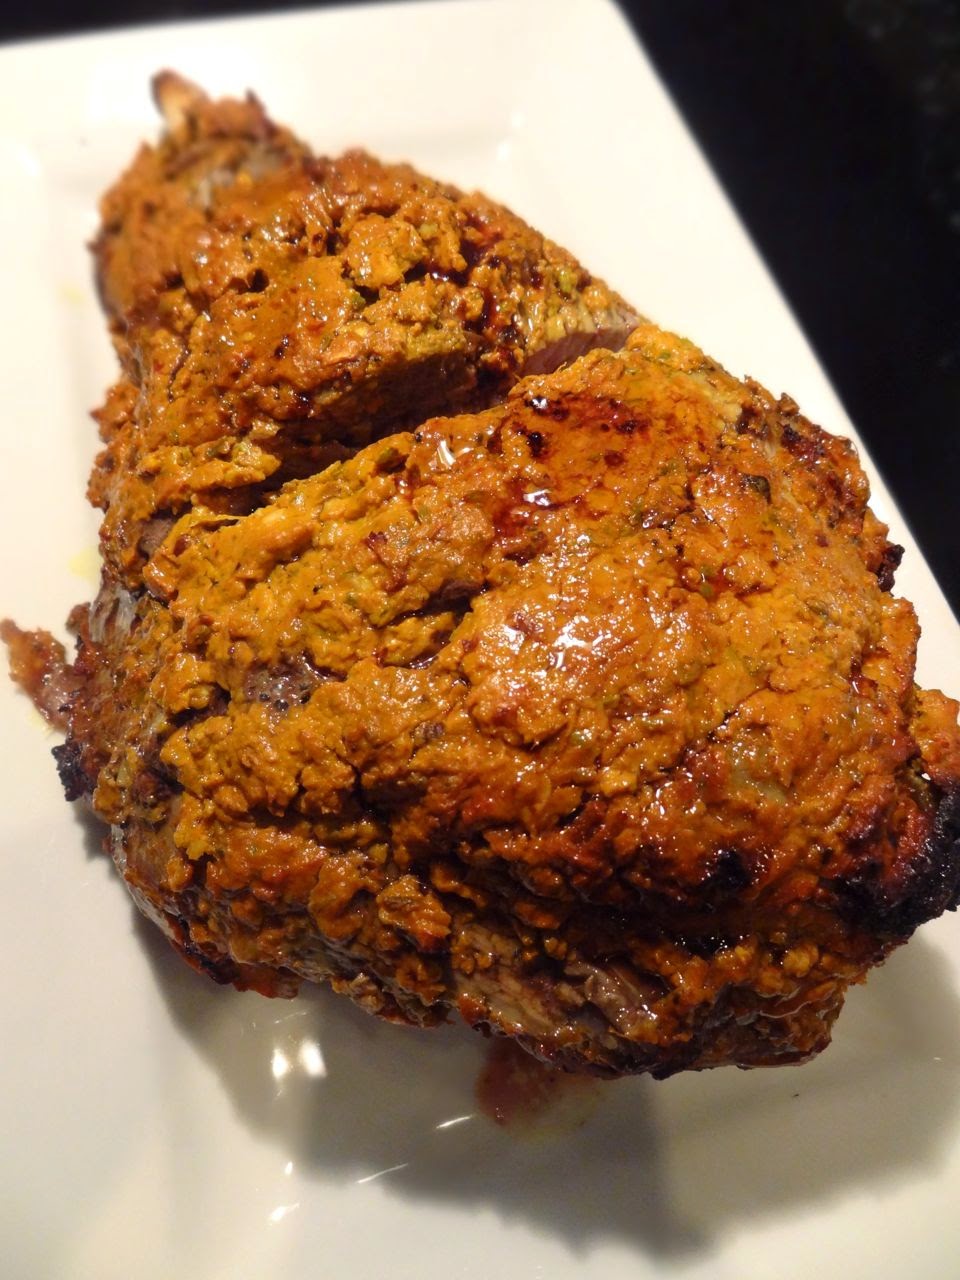 Scrumpdillyicious: Oven Roasted Indian-Spiced Leg of Lamb